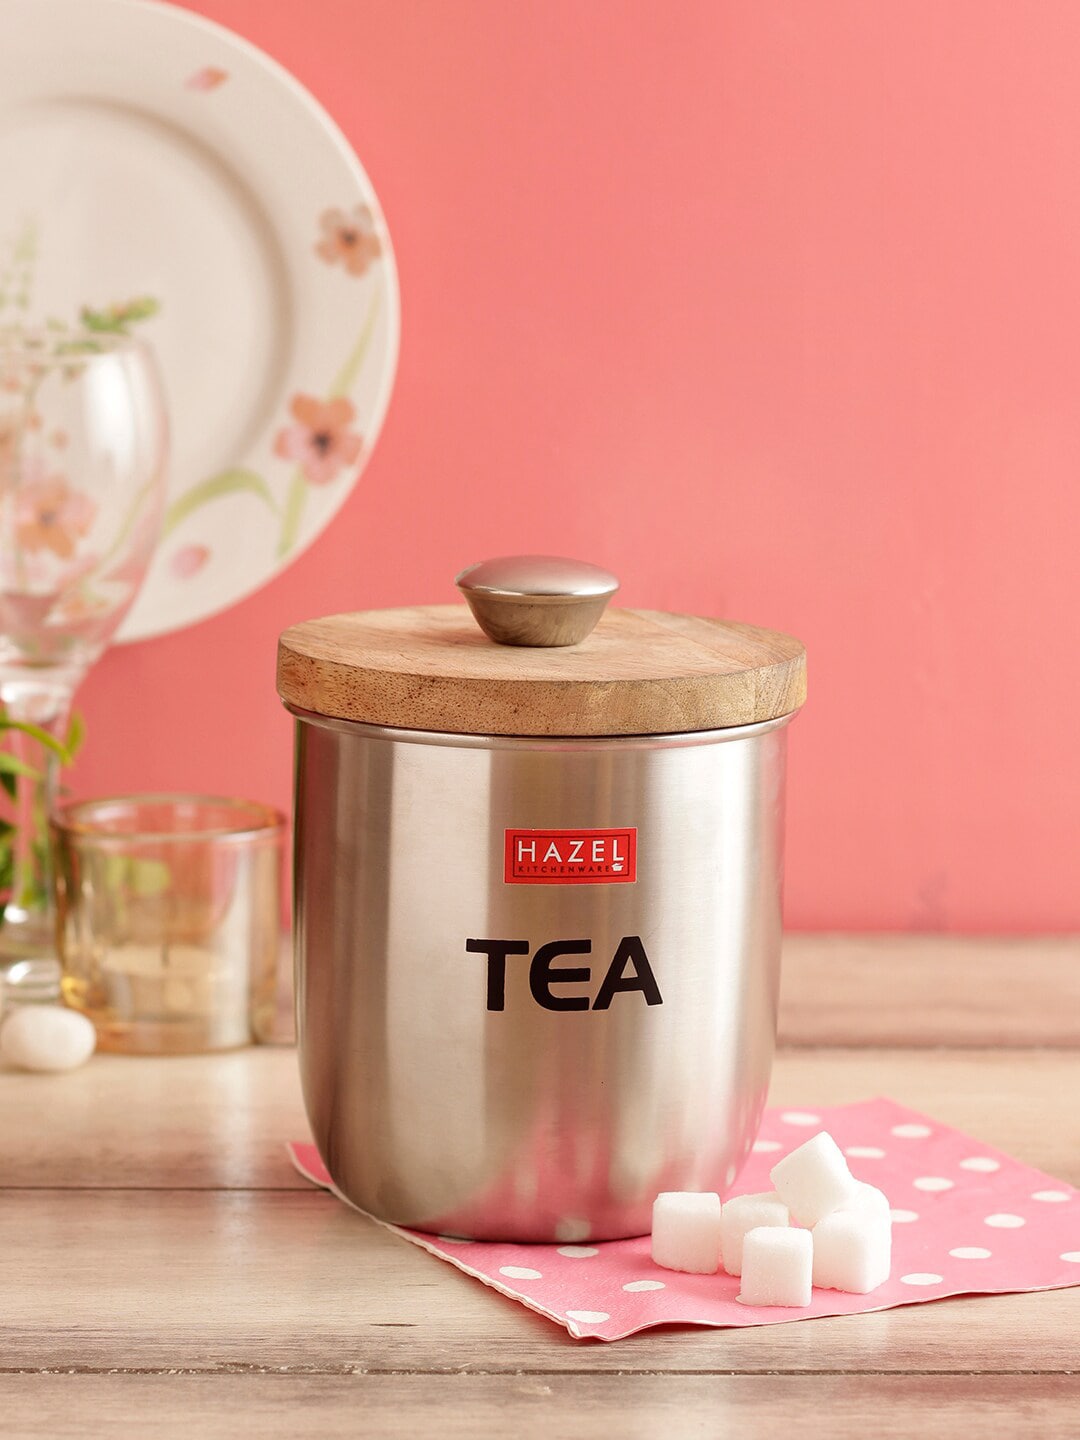 HAZEL Silver-Toned & Brown Stainless Steel Tea Storage Canister With Wooden Lid Price in India